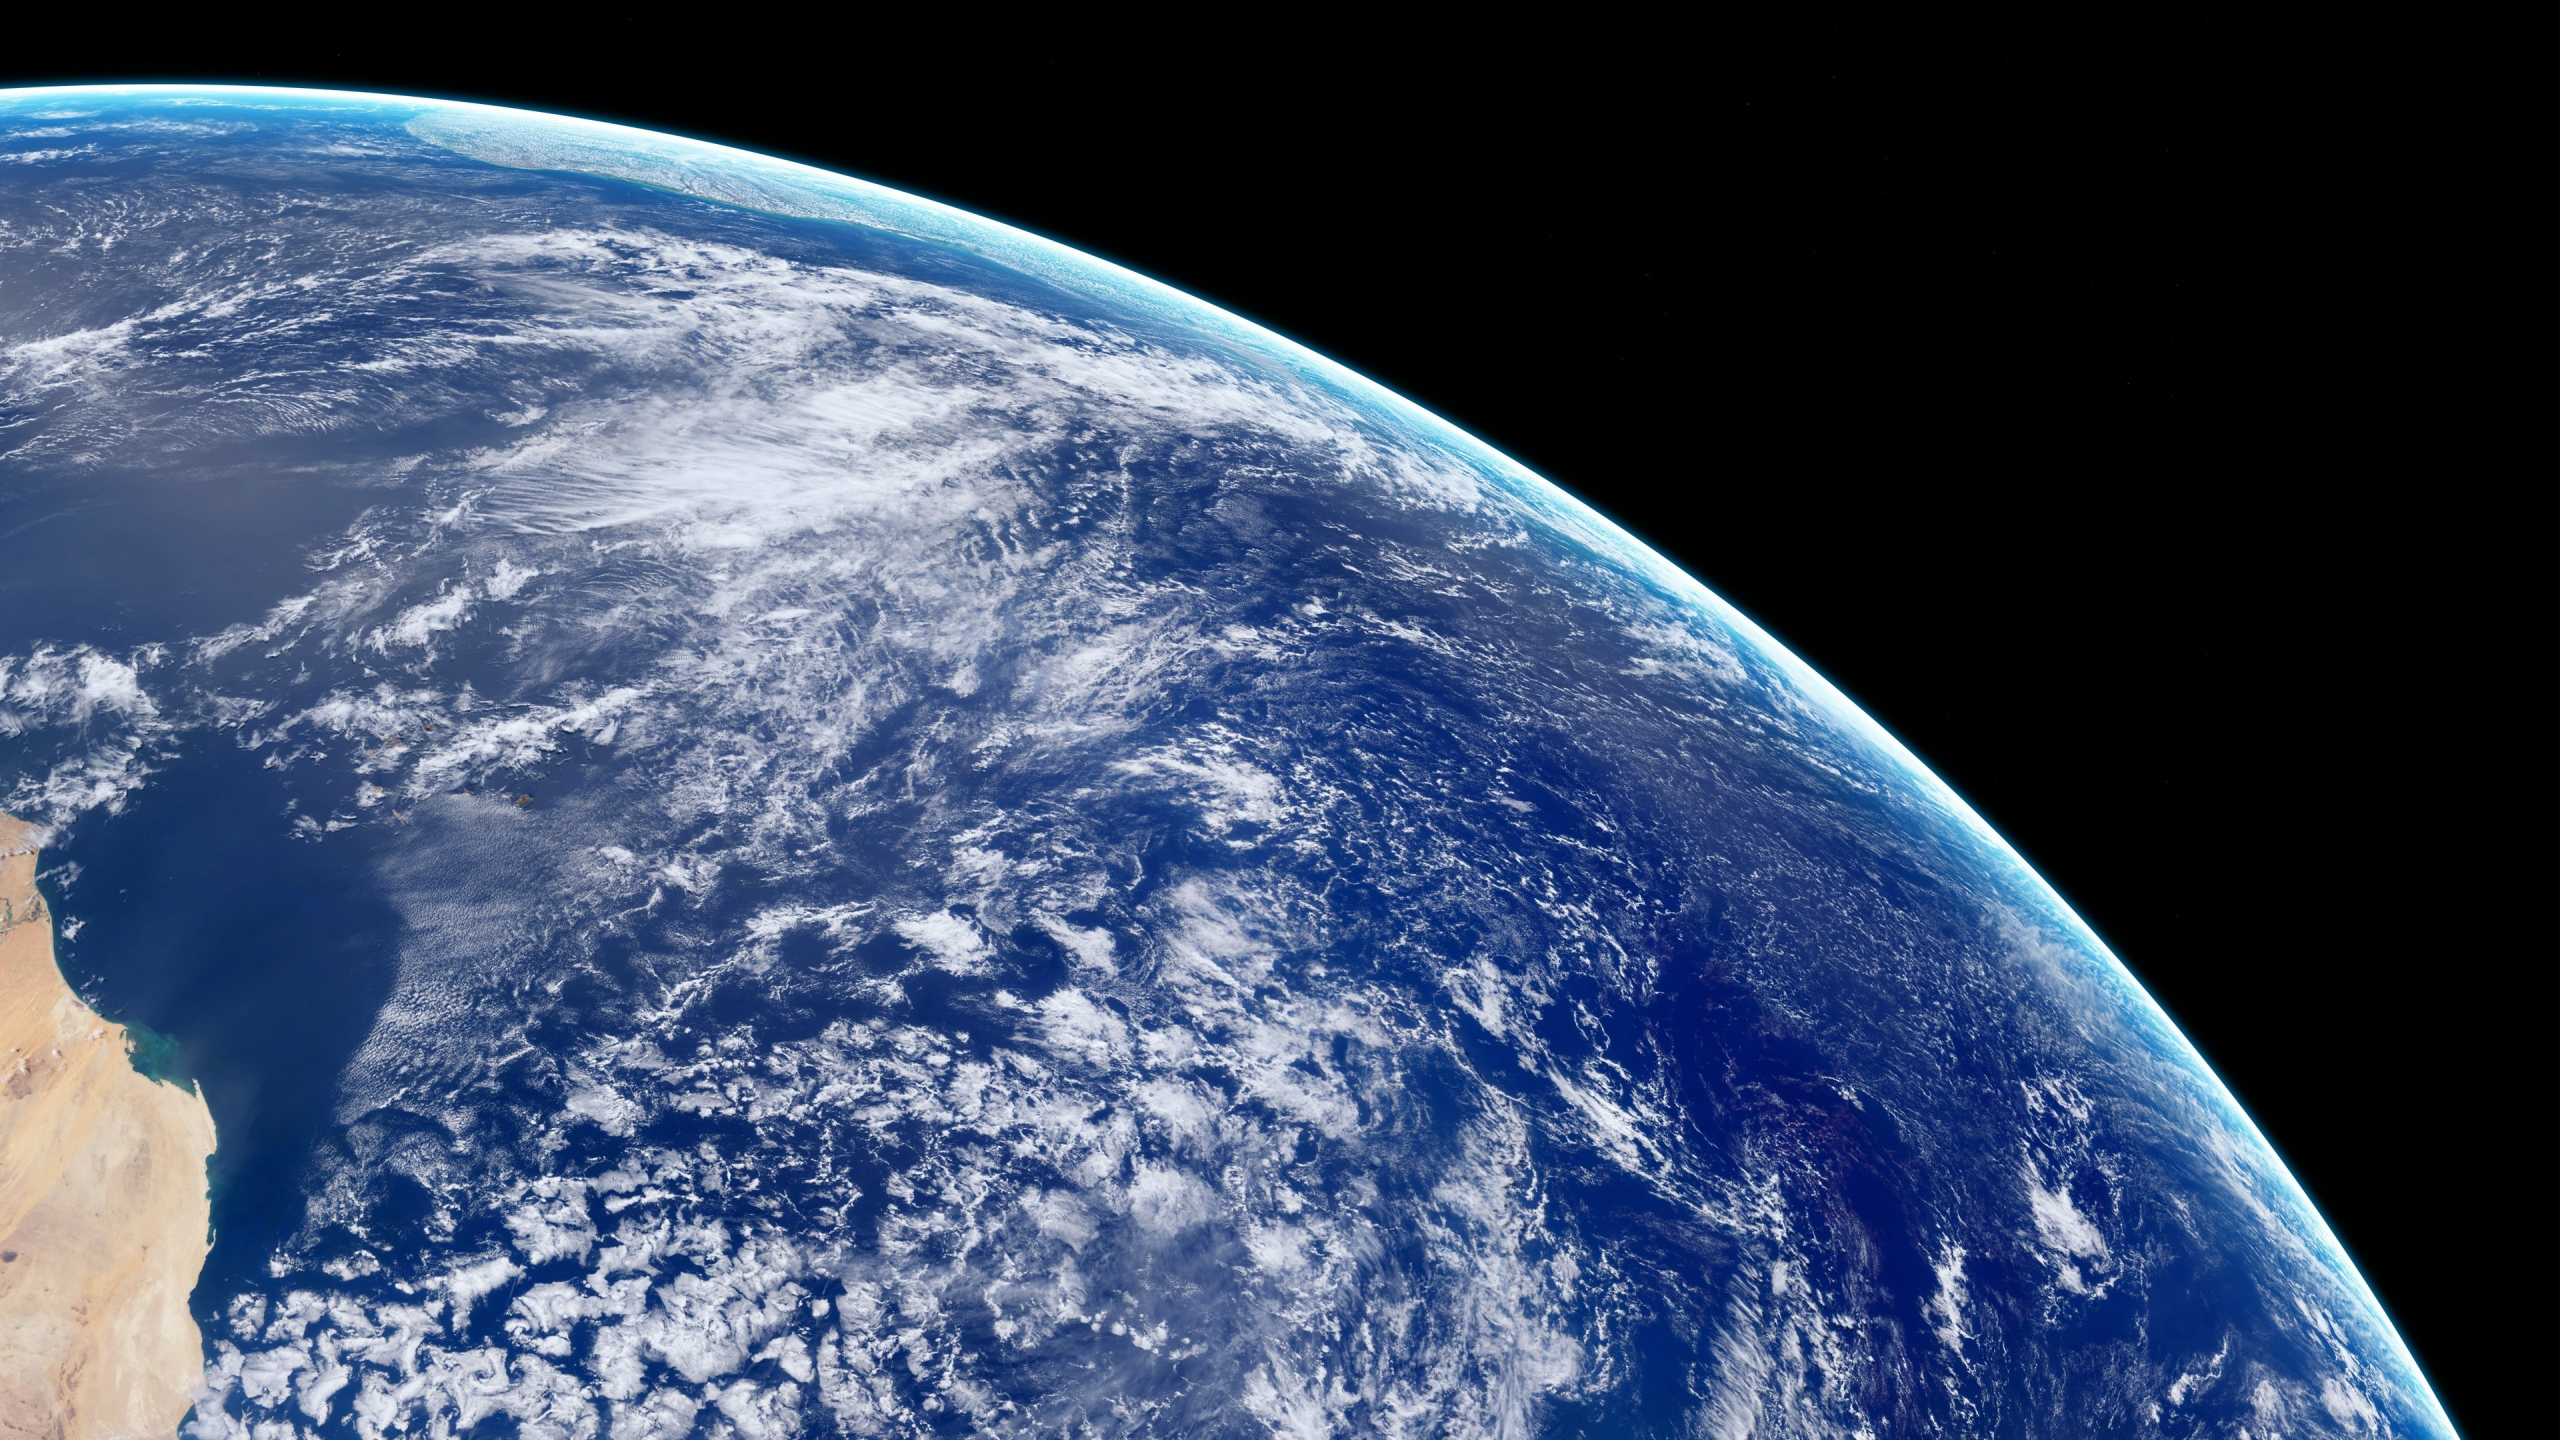 Download clouds, earth, view from space 2560x1440 wallpaper, dual wide 16:9 2560x1440 HD image, background, 6544